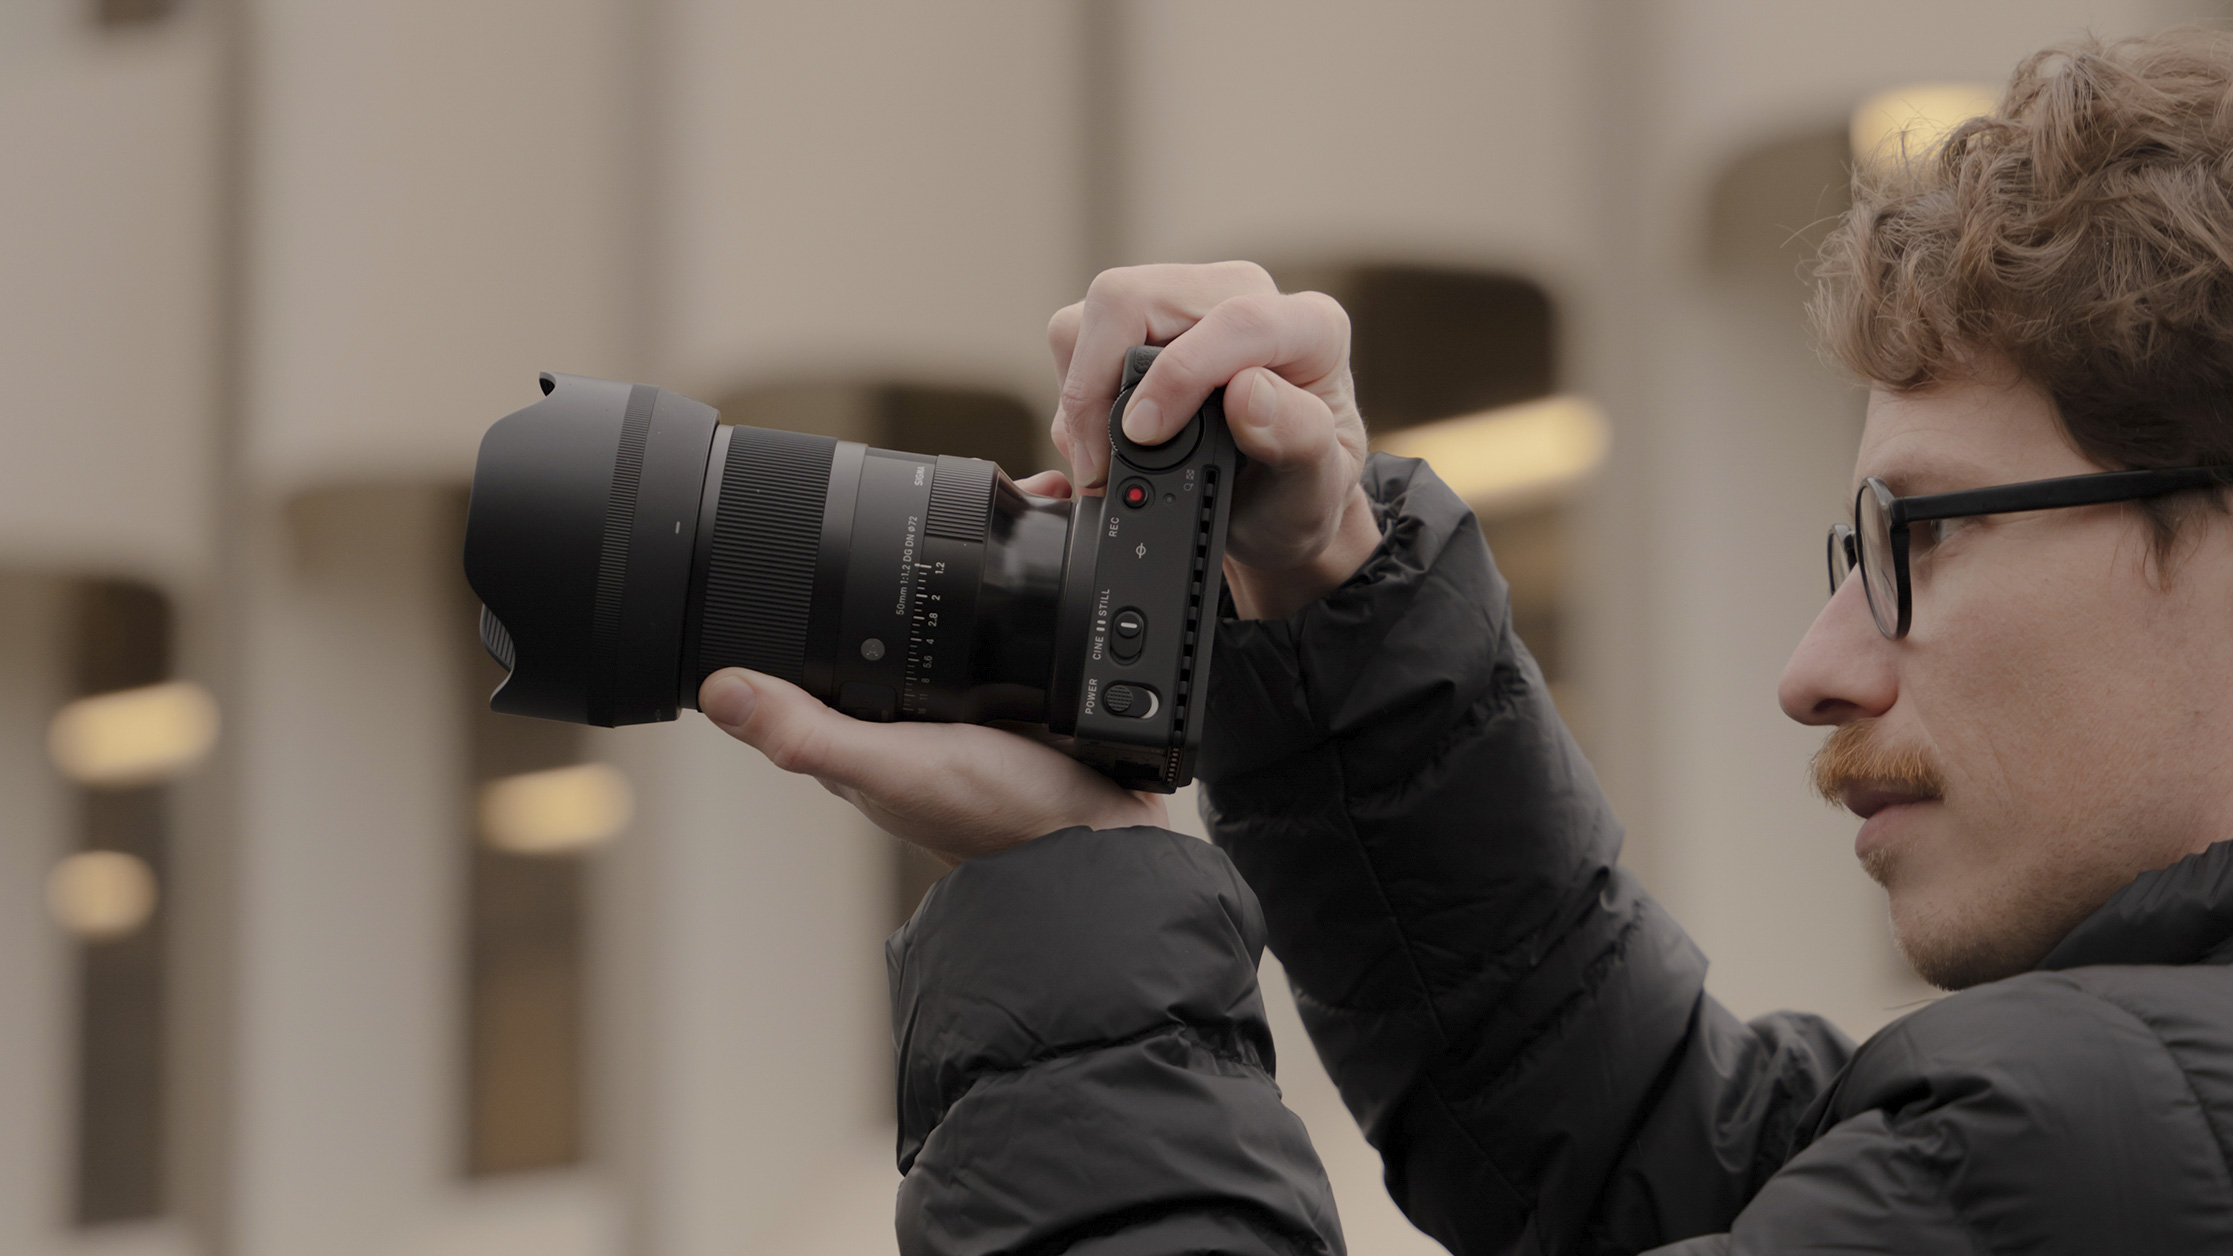 Sigma 50mm F1.2 DG DN Art lens in the hand